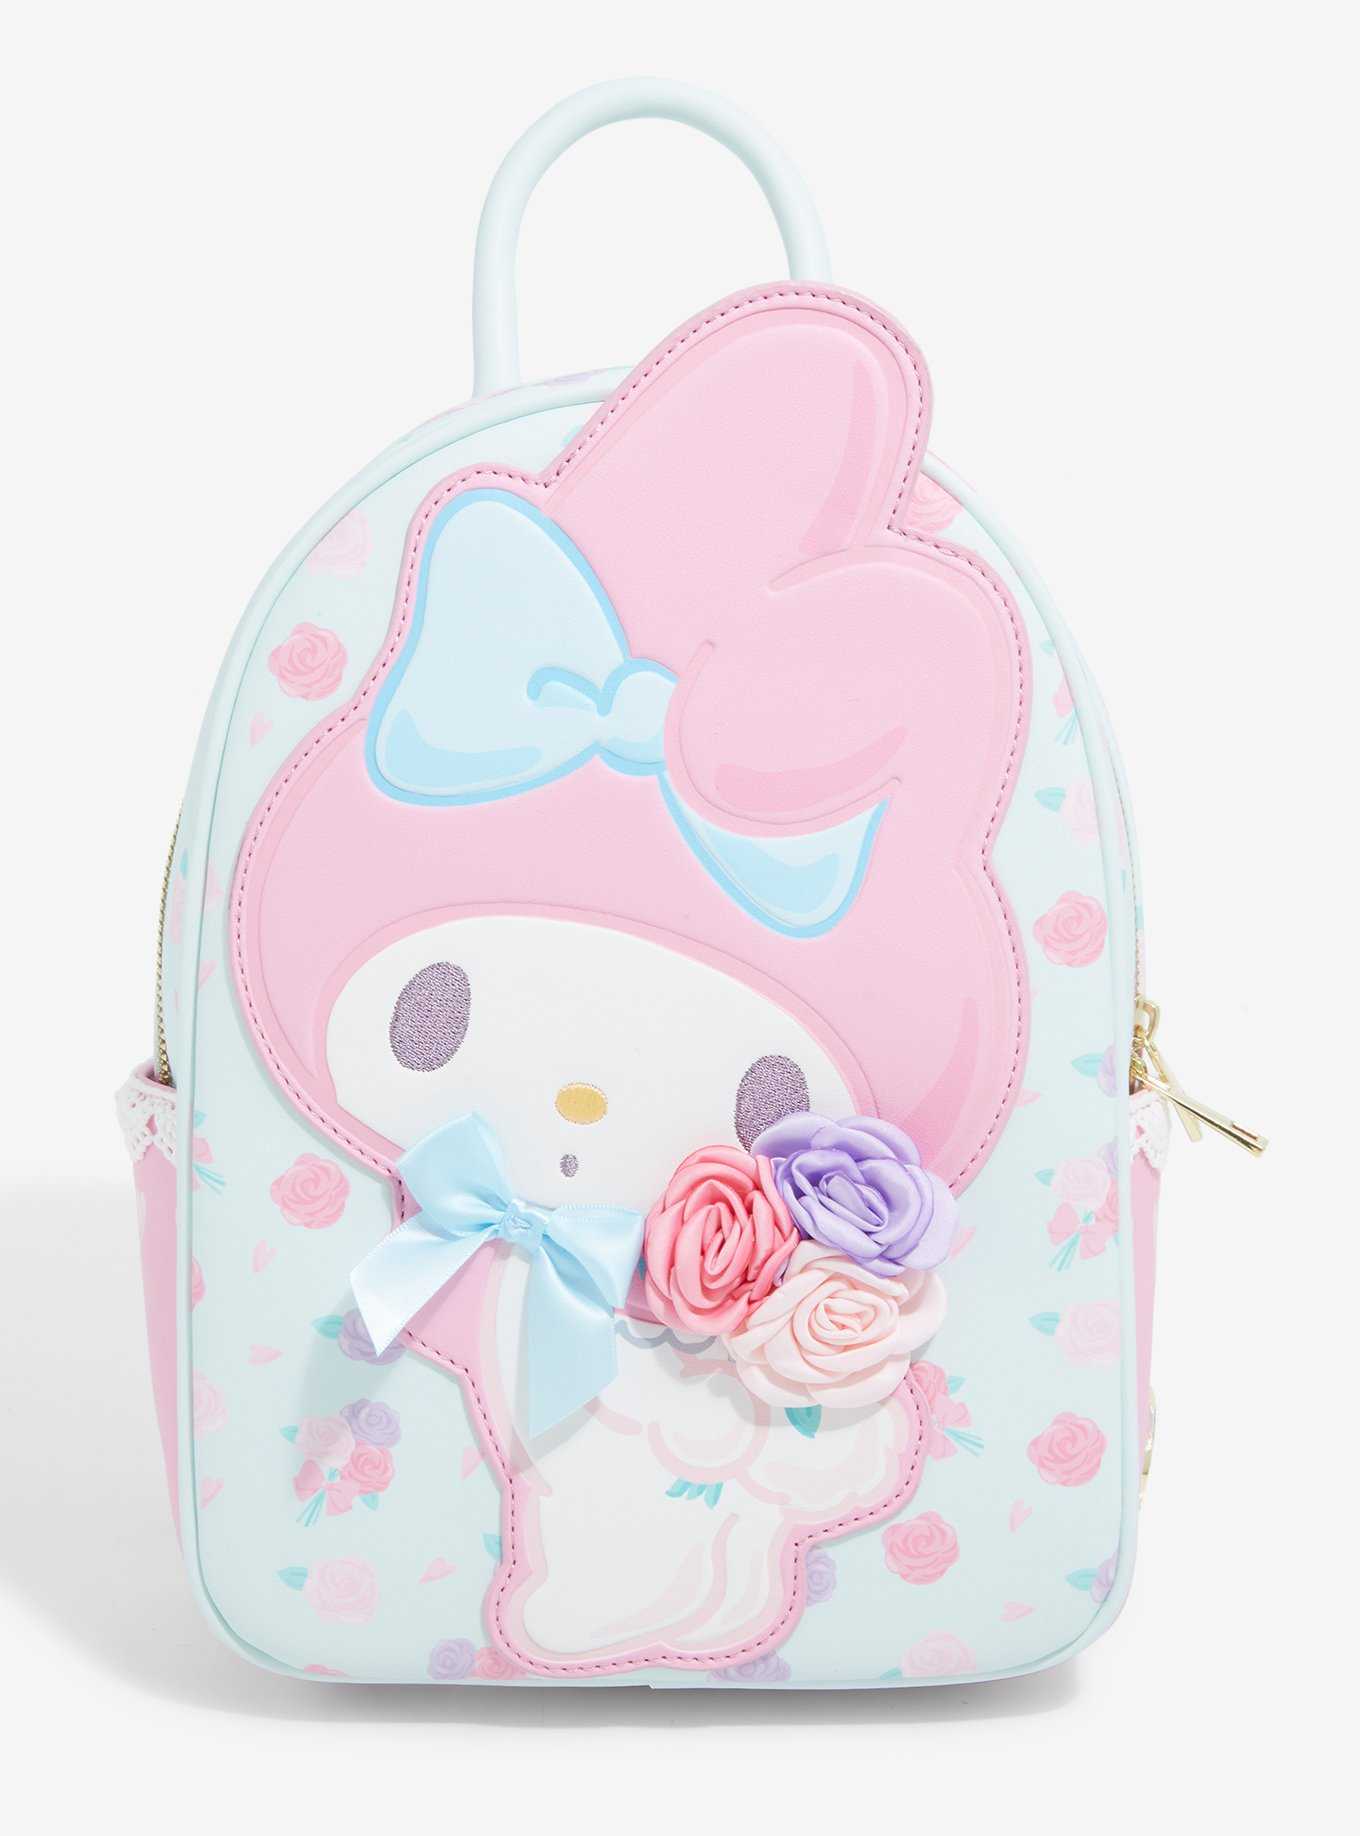 Hot Game Women Anime Aphmau Backpack Merch Cartoon Printing Floral Print  Pattern Bookbag High Quality Trend Schoolbags for Girls